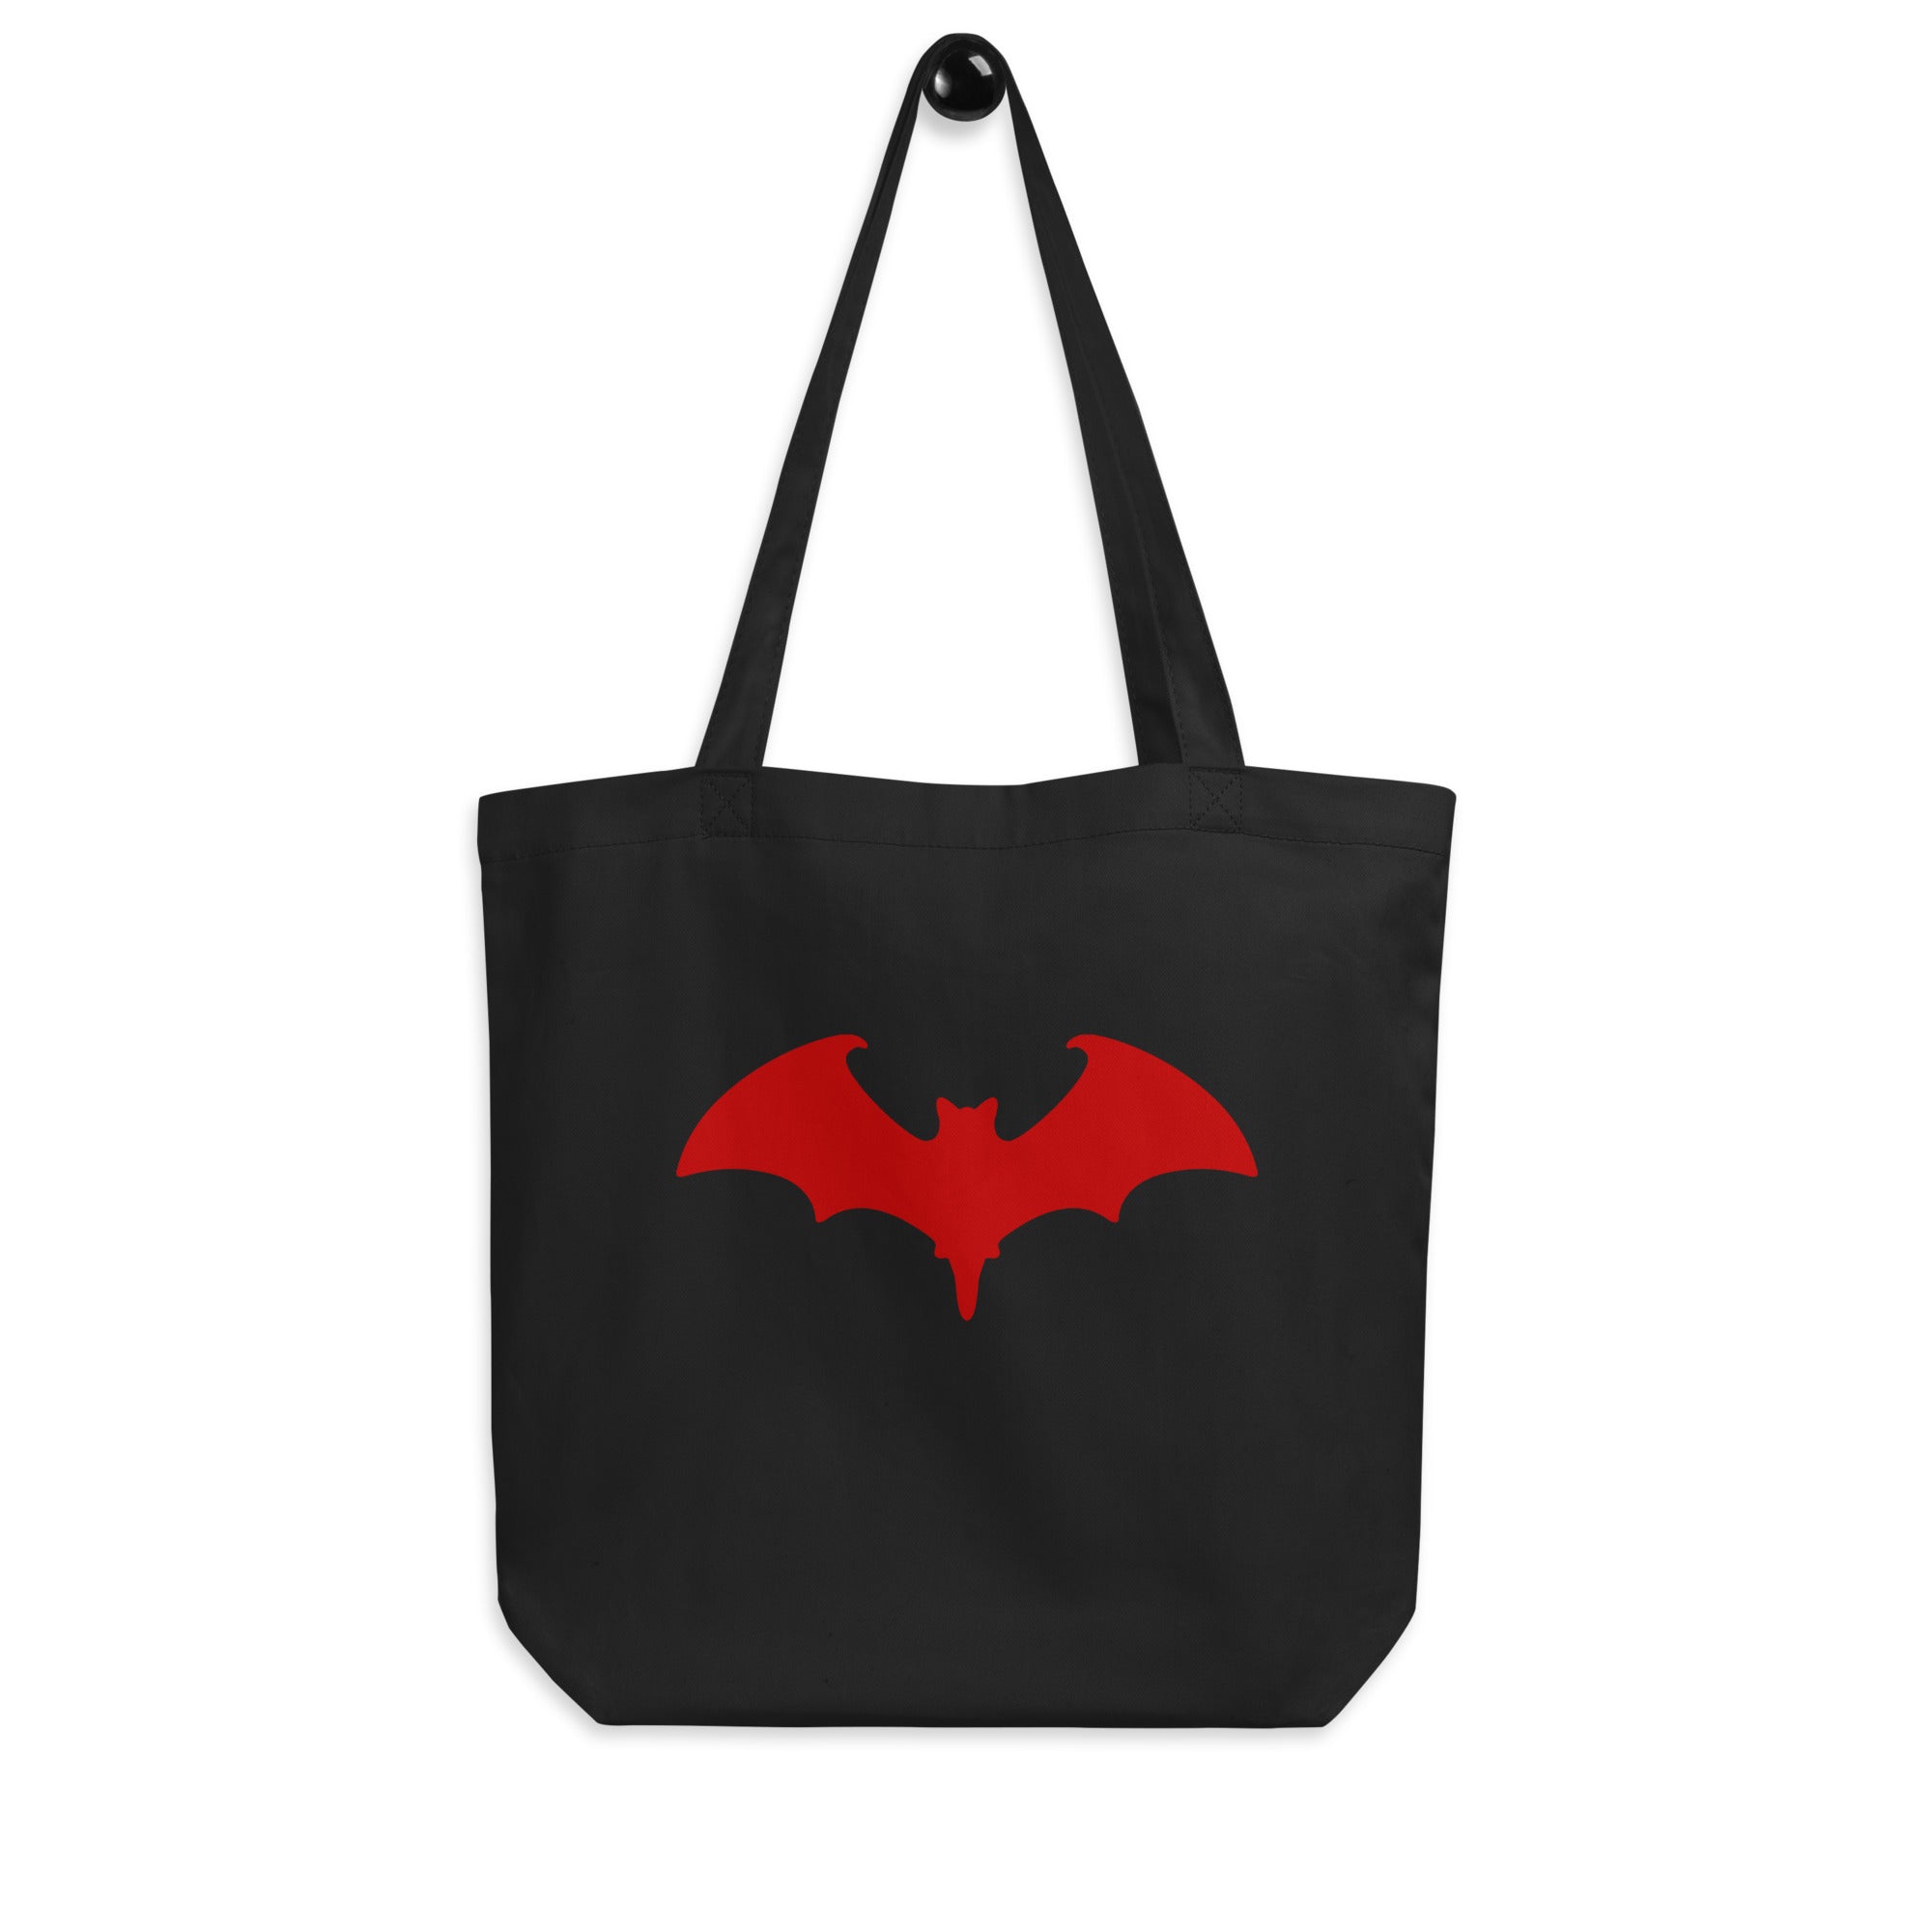 Red Vampire Bat Goth Style Halloween Eco Tote Bag - Edge of Life Designs